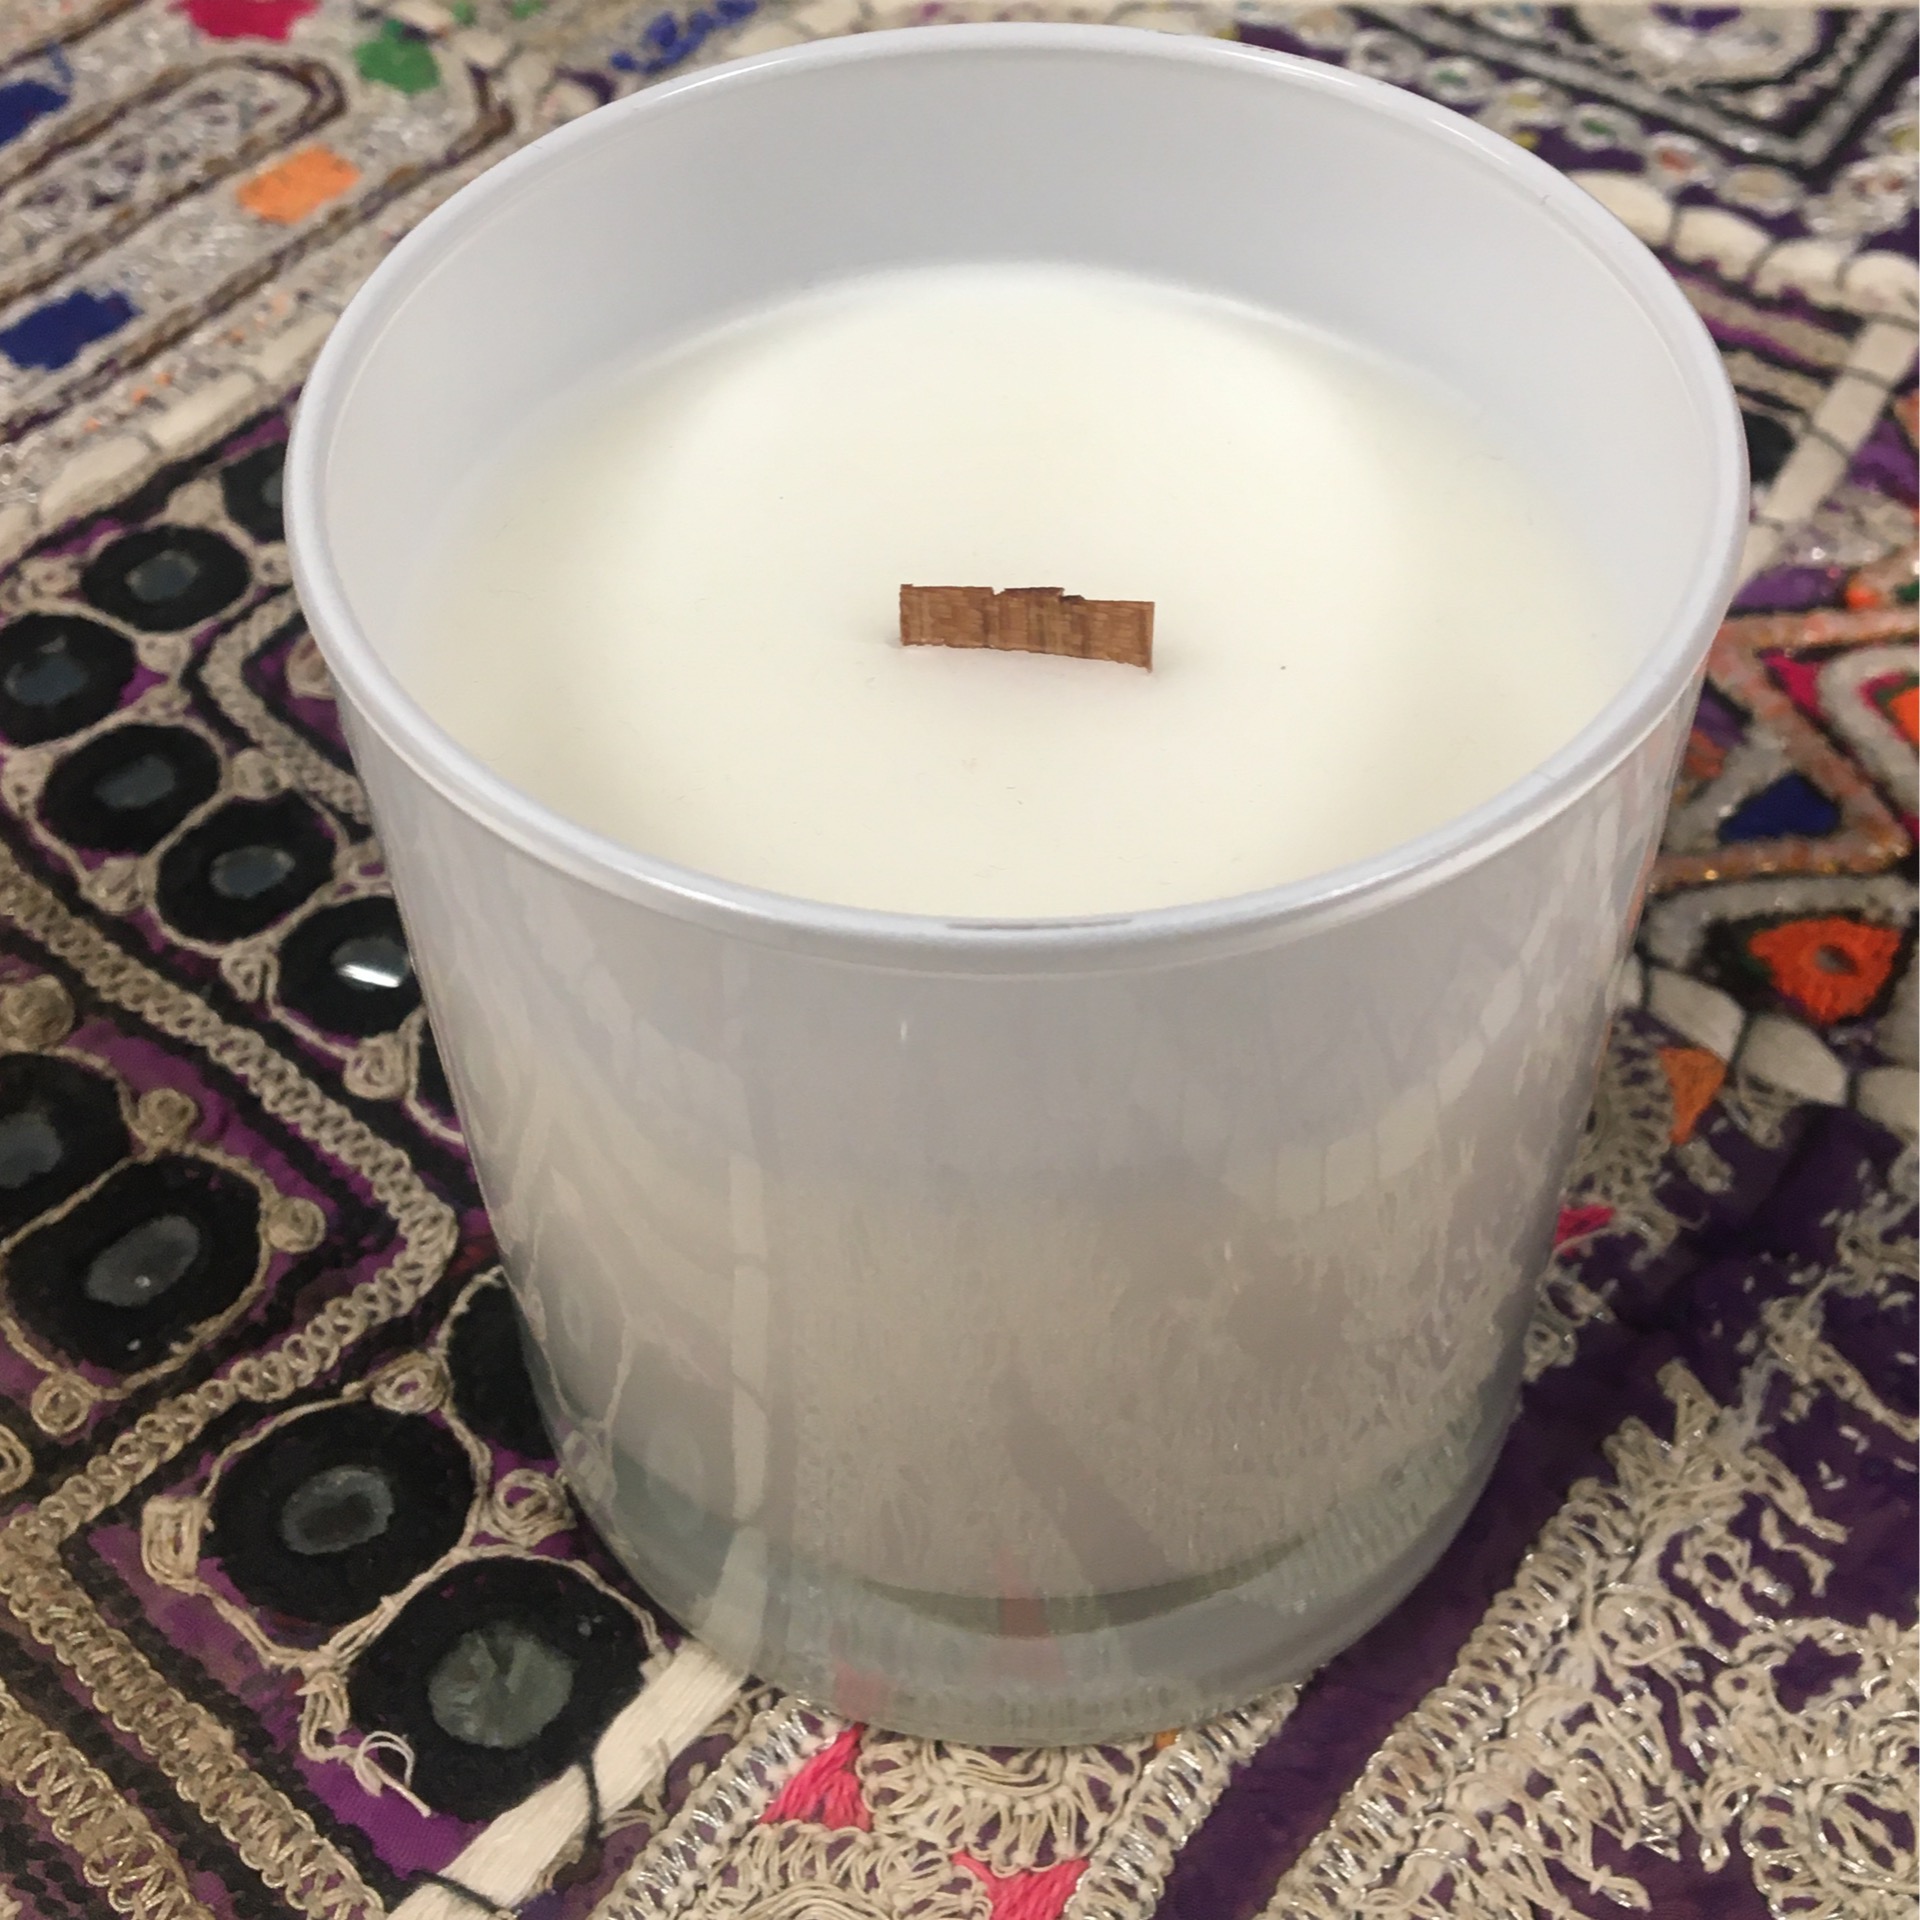 Candle, Glass - Flowering Clove Sandalwood - Mineral Springs Trading Co.